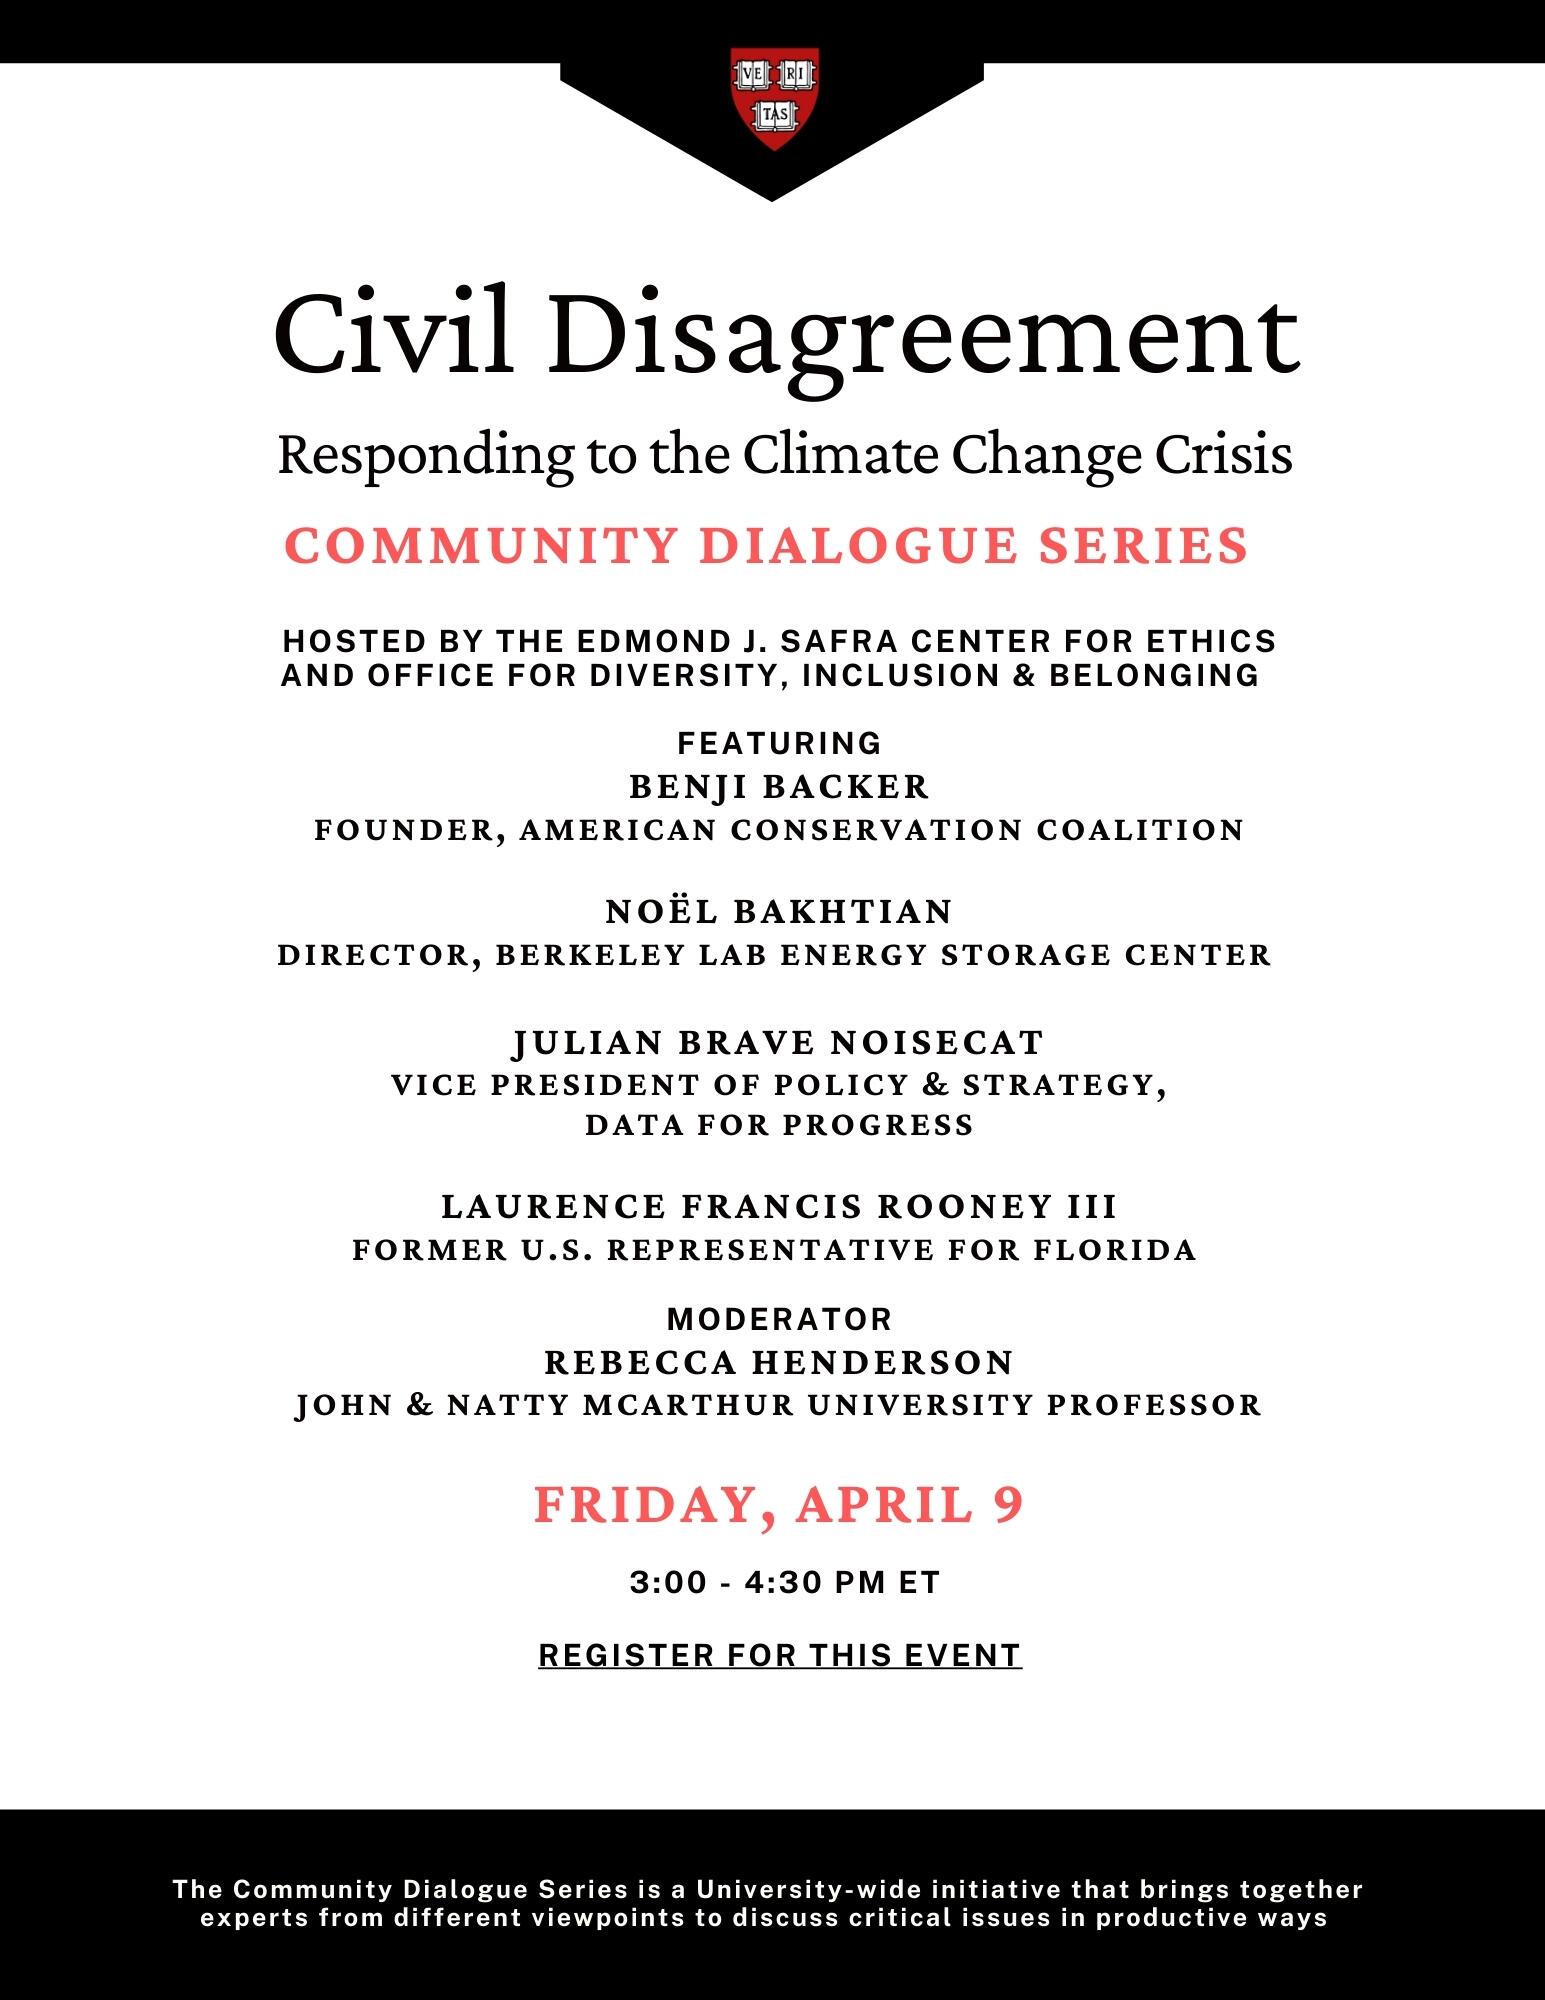 Civil Disagreement: Responding to Climate Change on April 9th